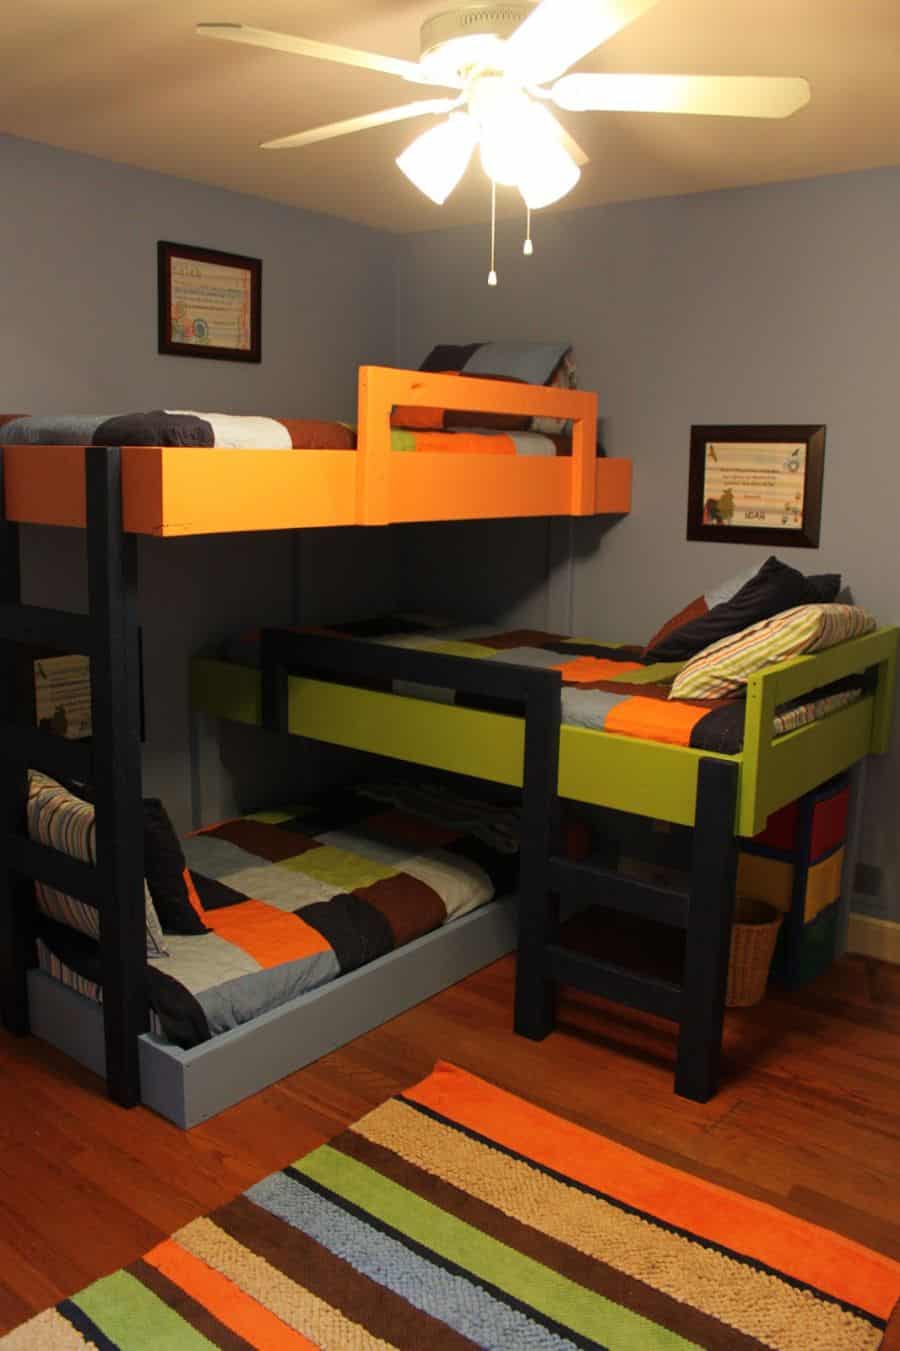 9 Things To Consider When Choosing Bunk Beds For Your Kids